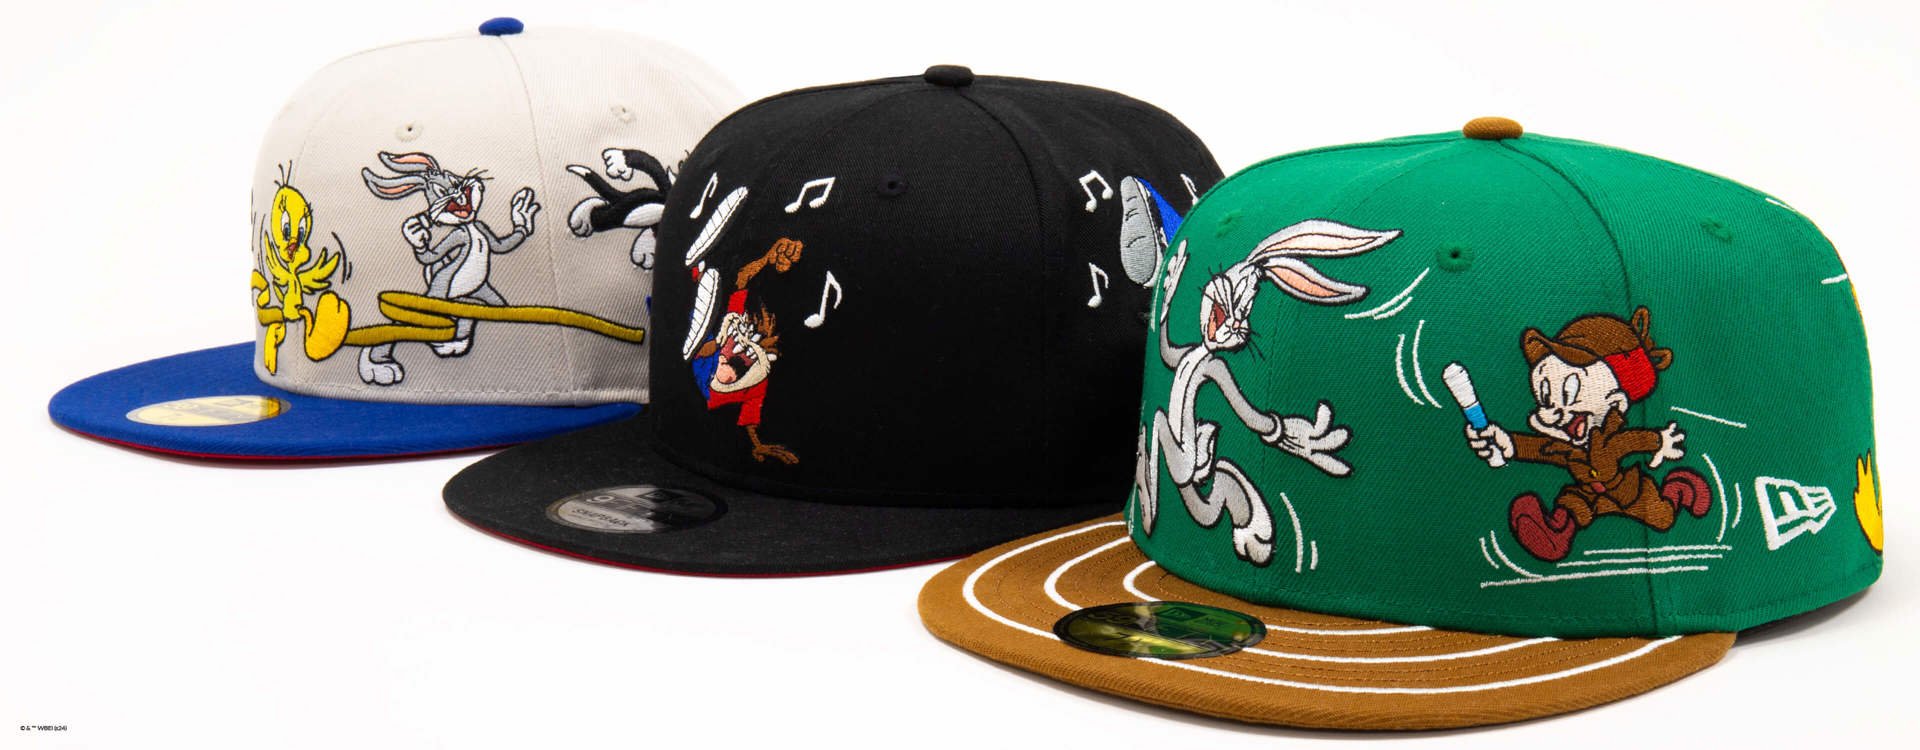 three lined up 59FIFTY caps with looney tunes characters 